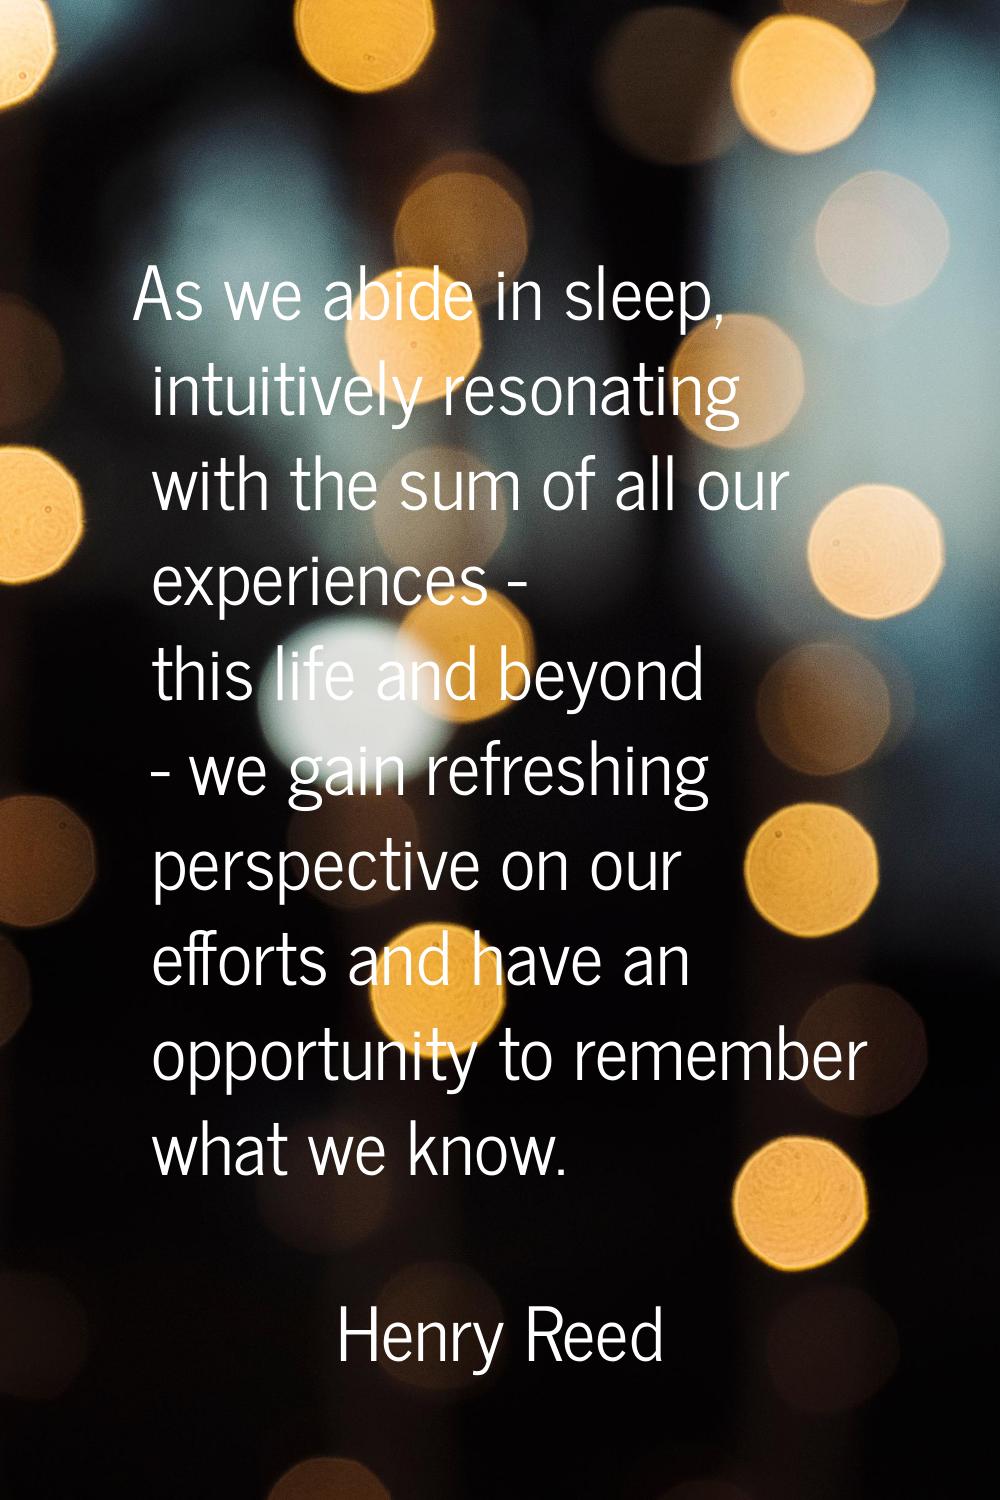 As we abide in sleep, intuitively resonating with the sum of all our experiences - this life and be